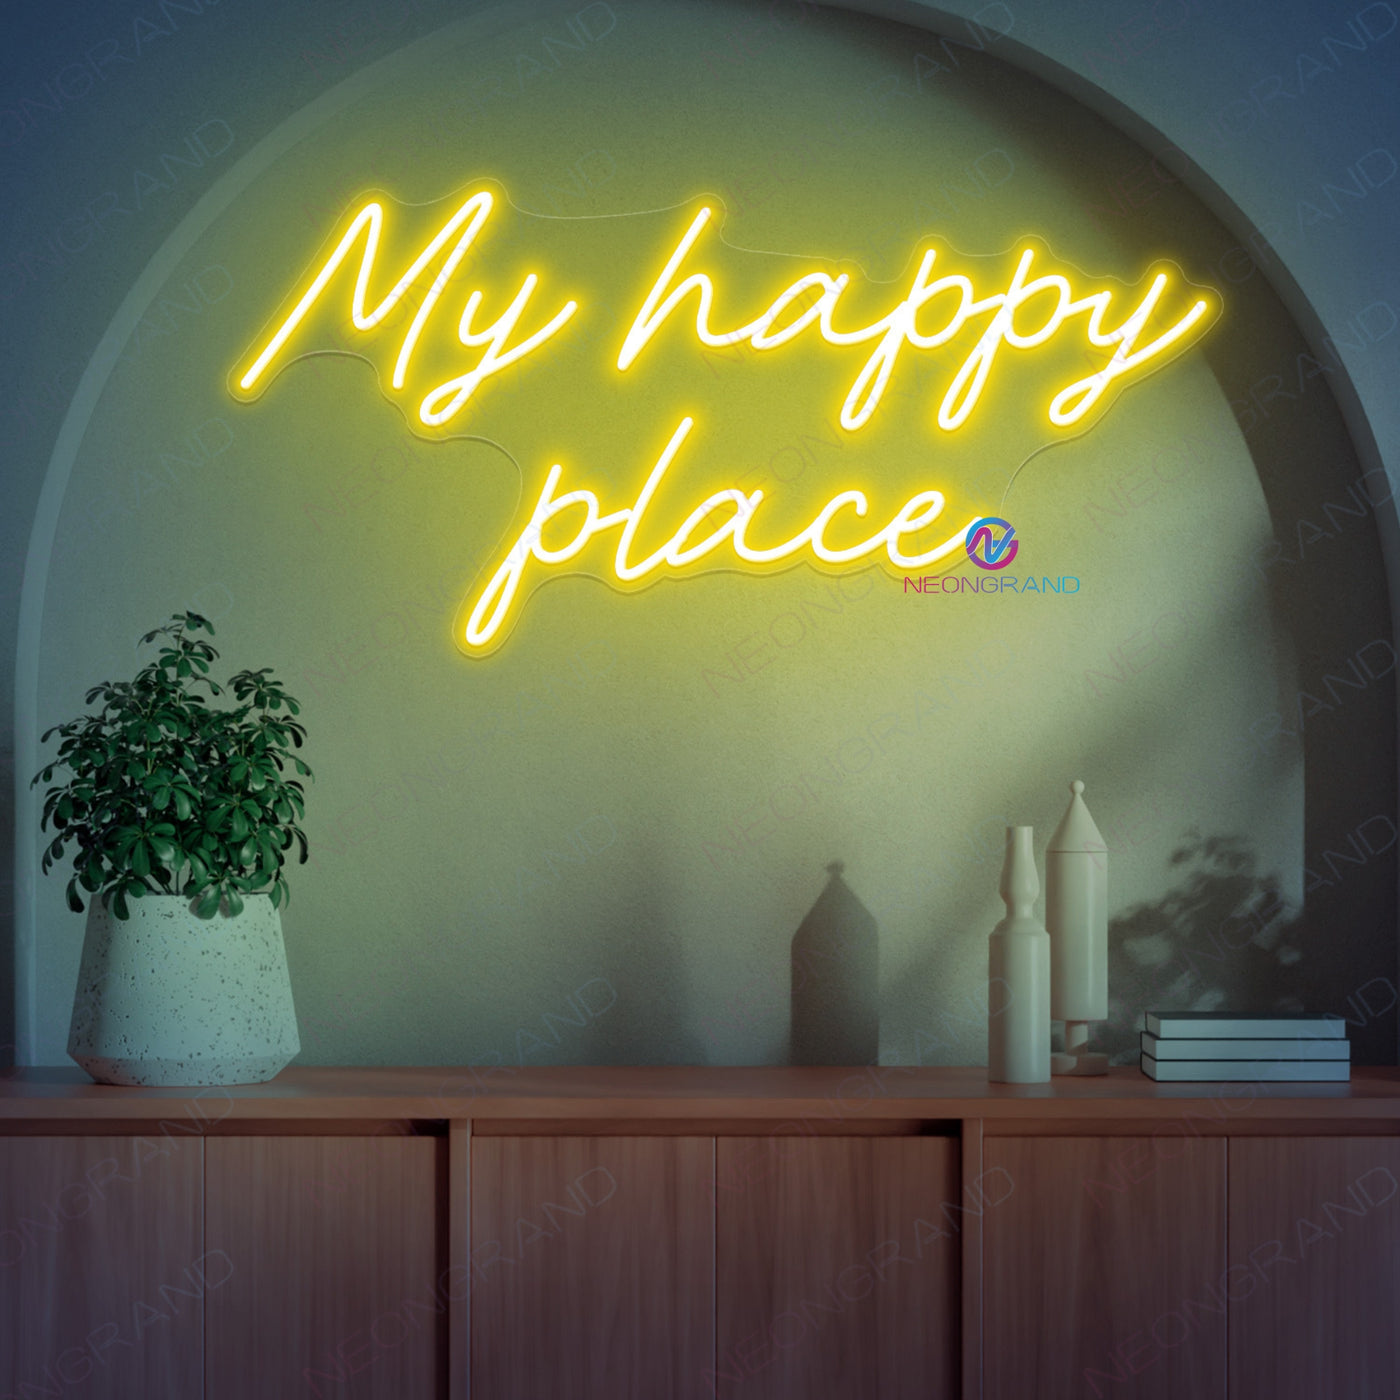 My Happy Place Neon Sign Word Led Light